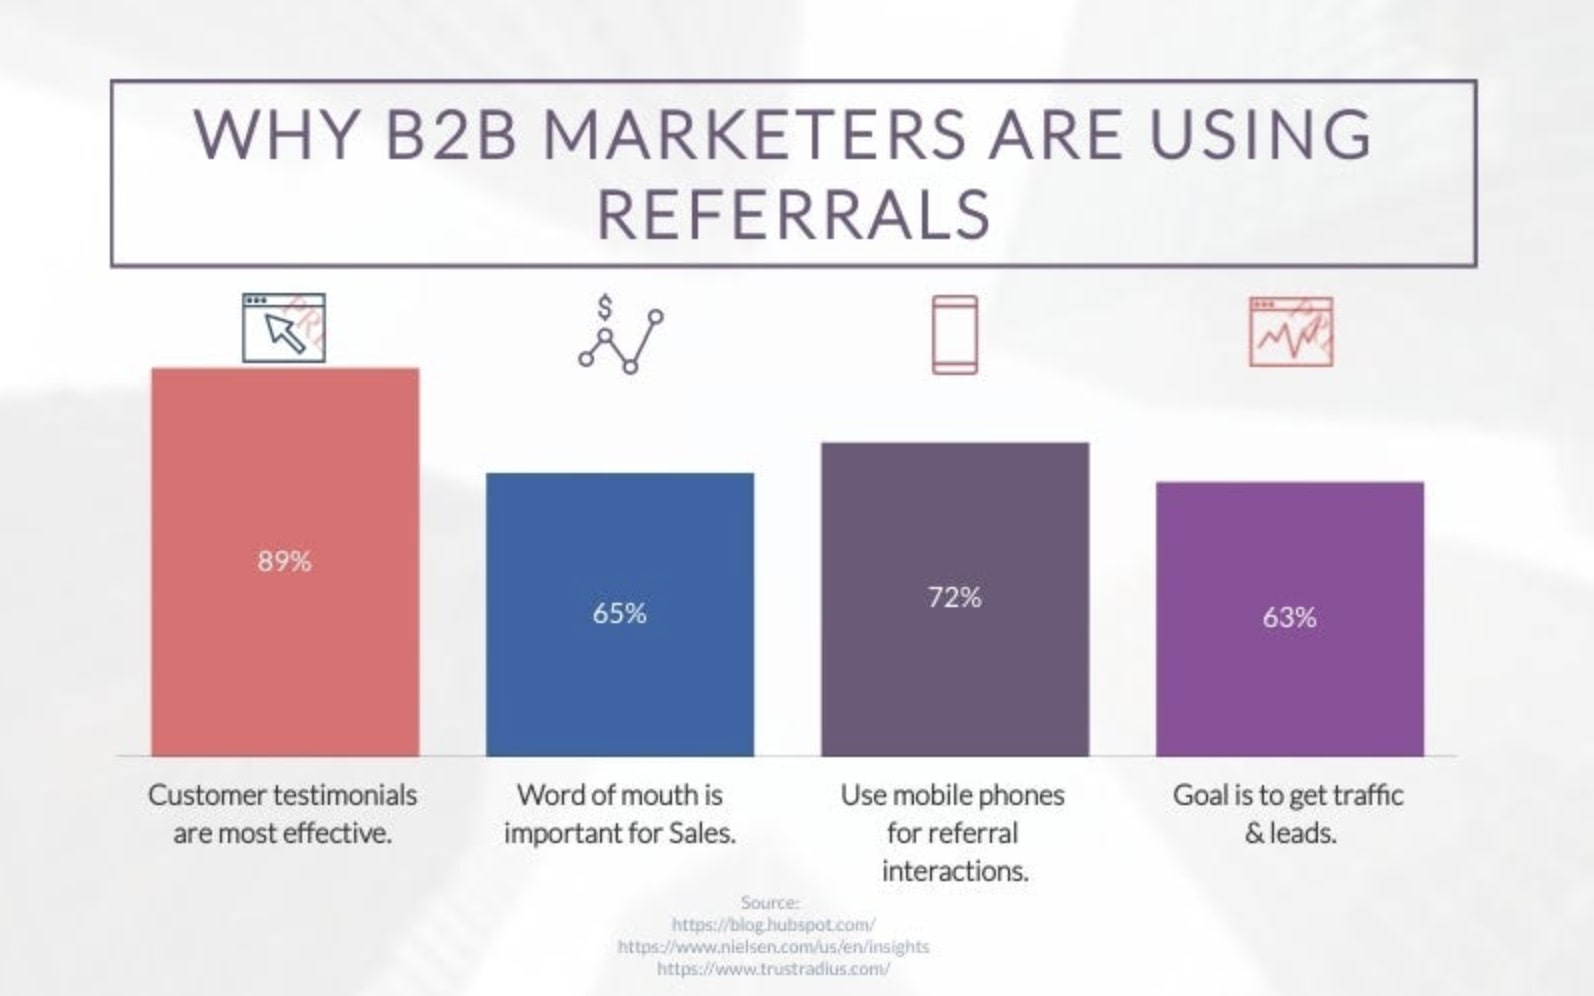 why is referral traffic important for marketers